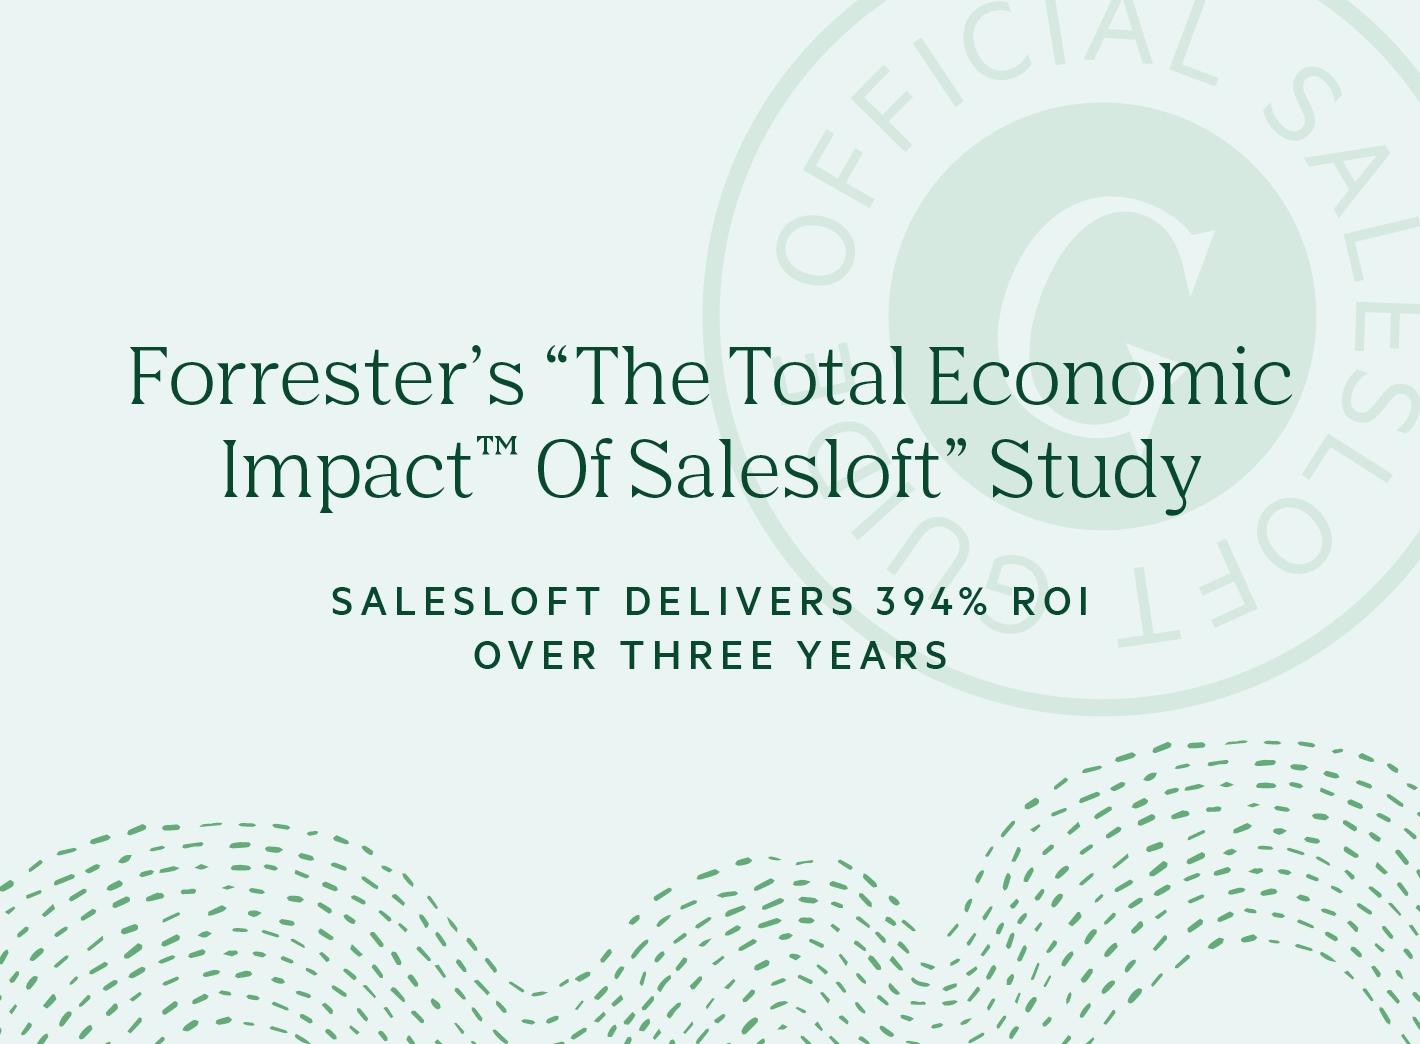 "Forrester's 'The total economic impact of Salesloft study'"